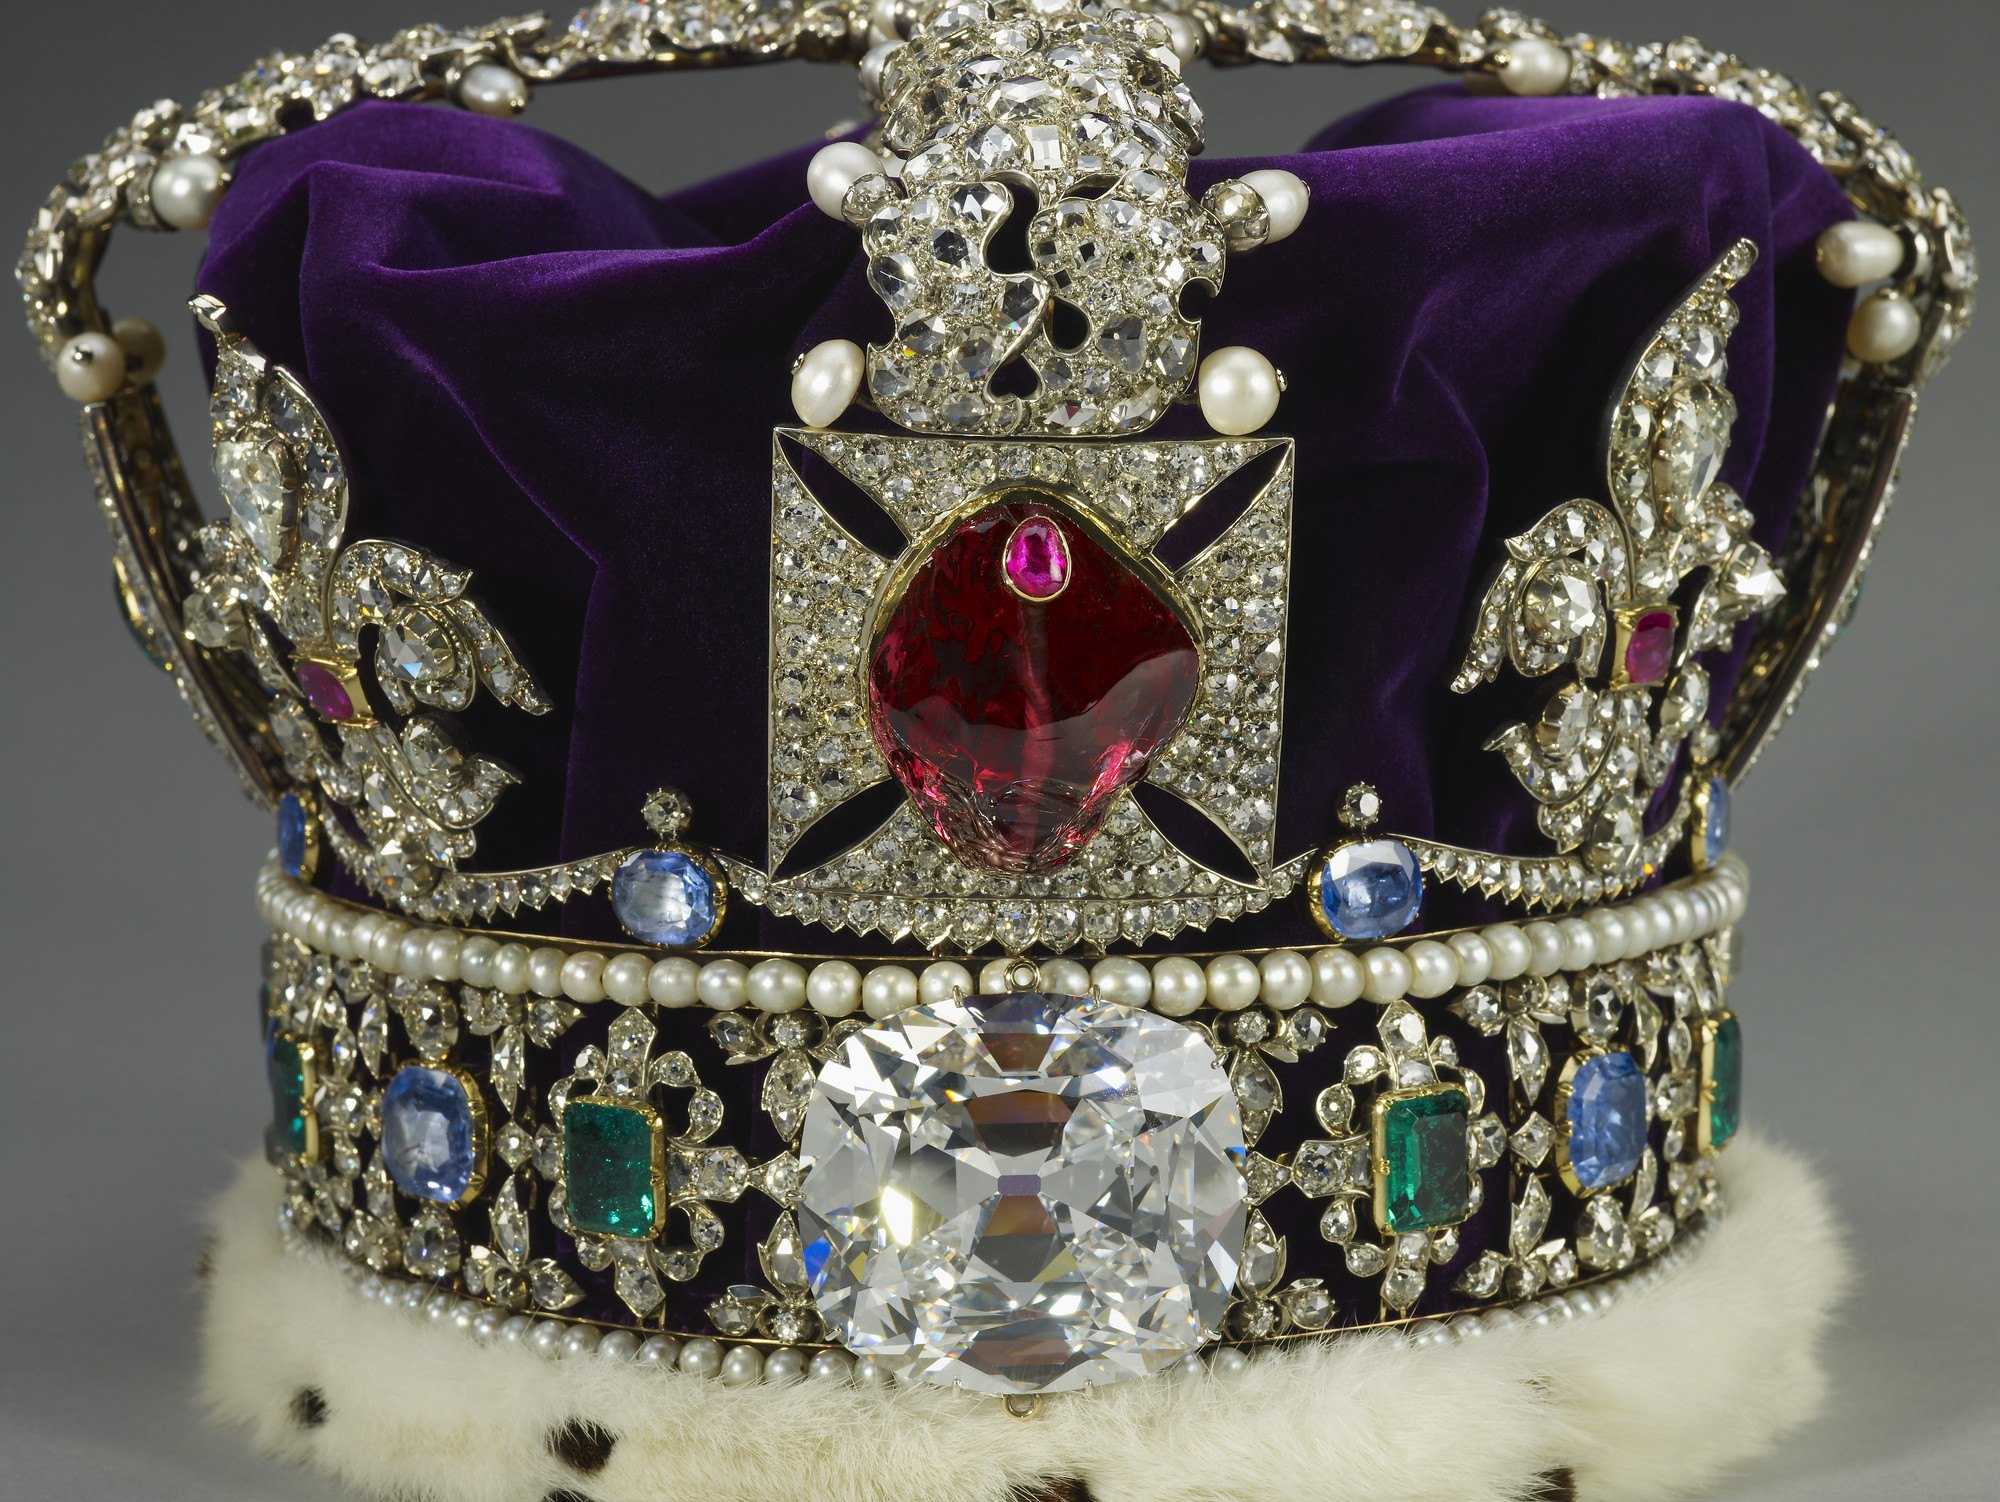 2,868 diamonds, 273 pearls, 17 sapphires, 11 emeralds, and 5 rubies. The Imperial State Crown the United Kingdom